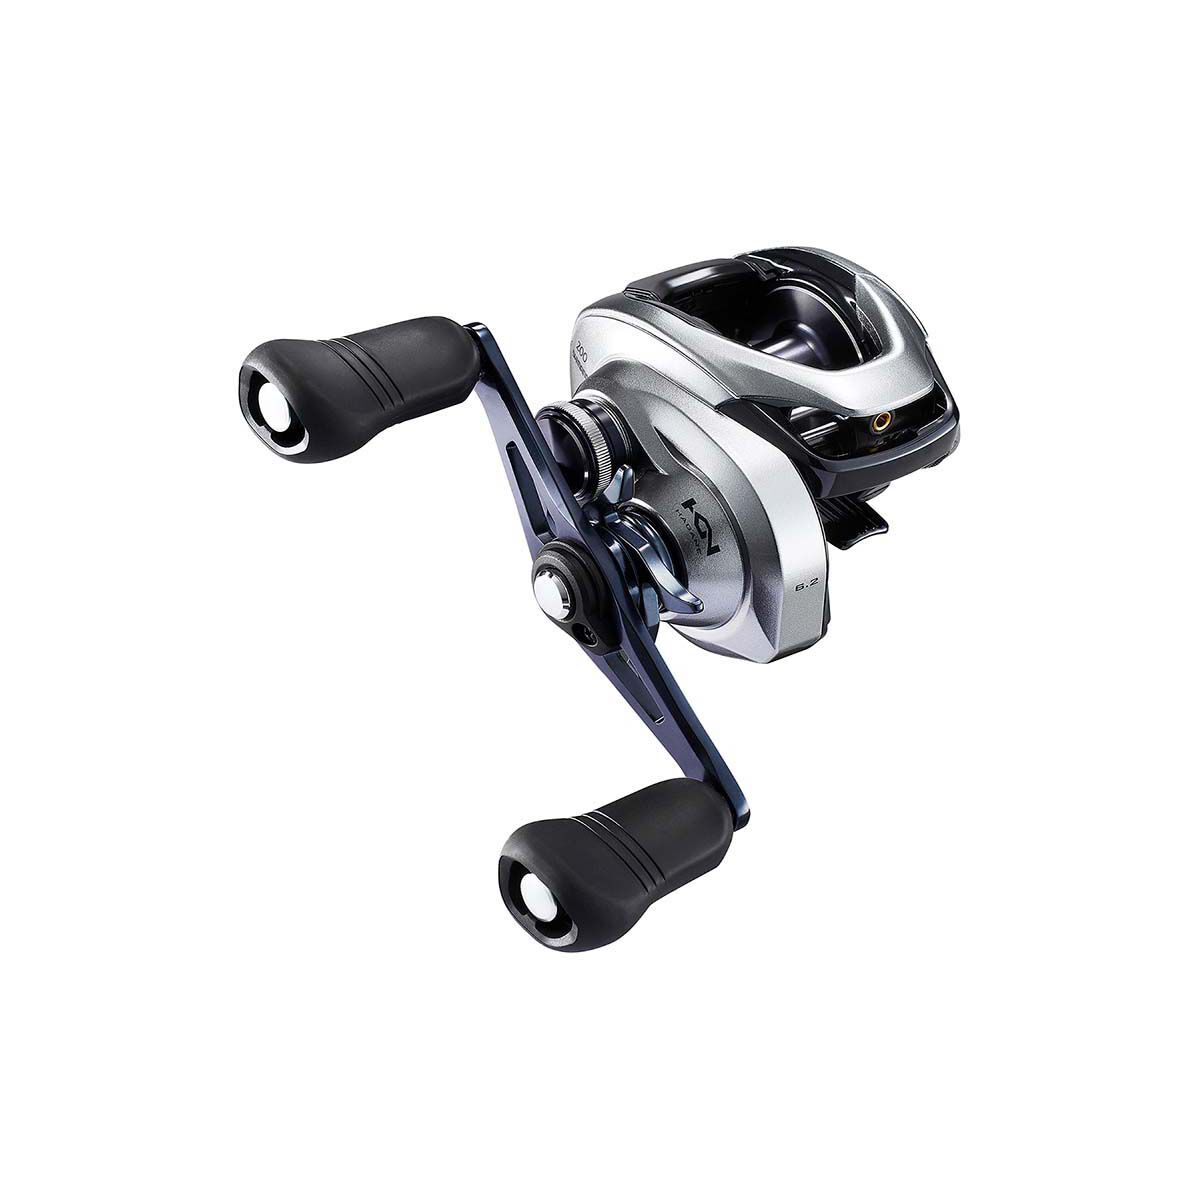 SHIMANO TRANX 200 UNBOXING REVIEW & TEST (5LB Bass Caught!) 